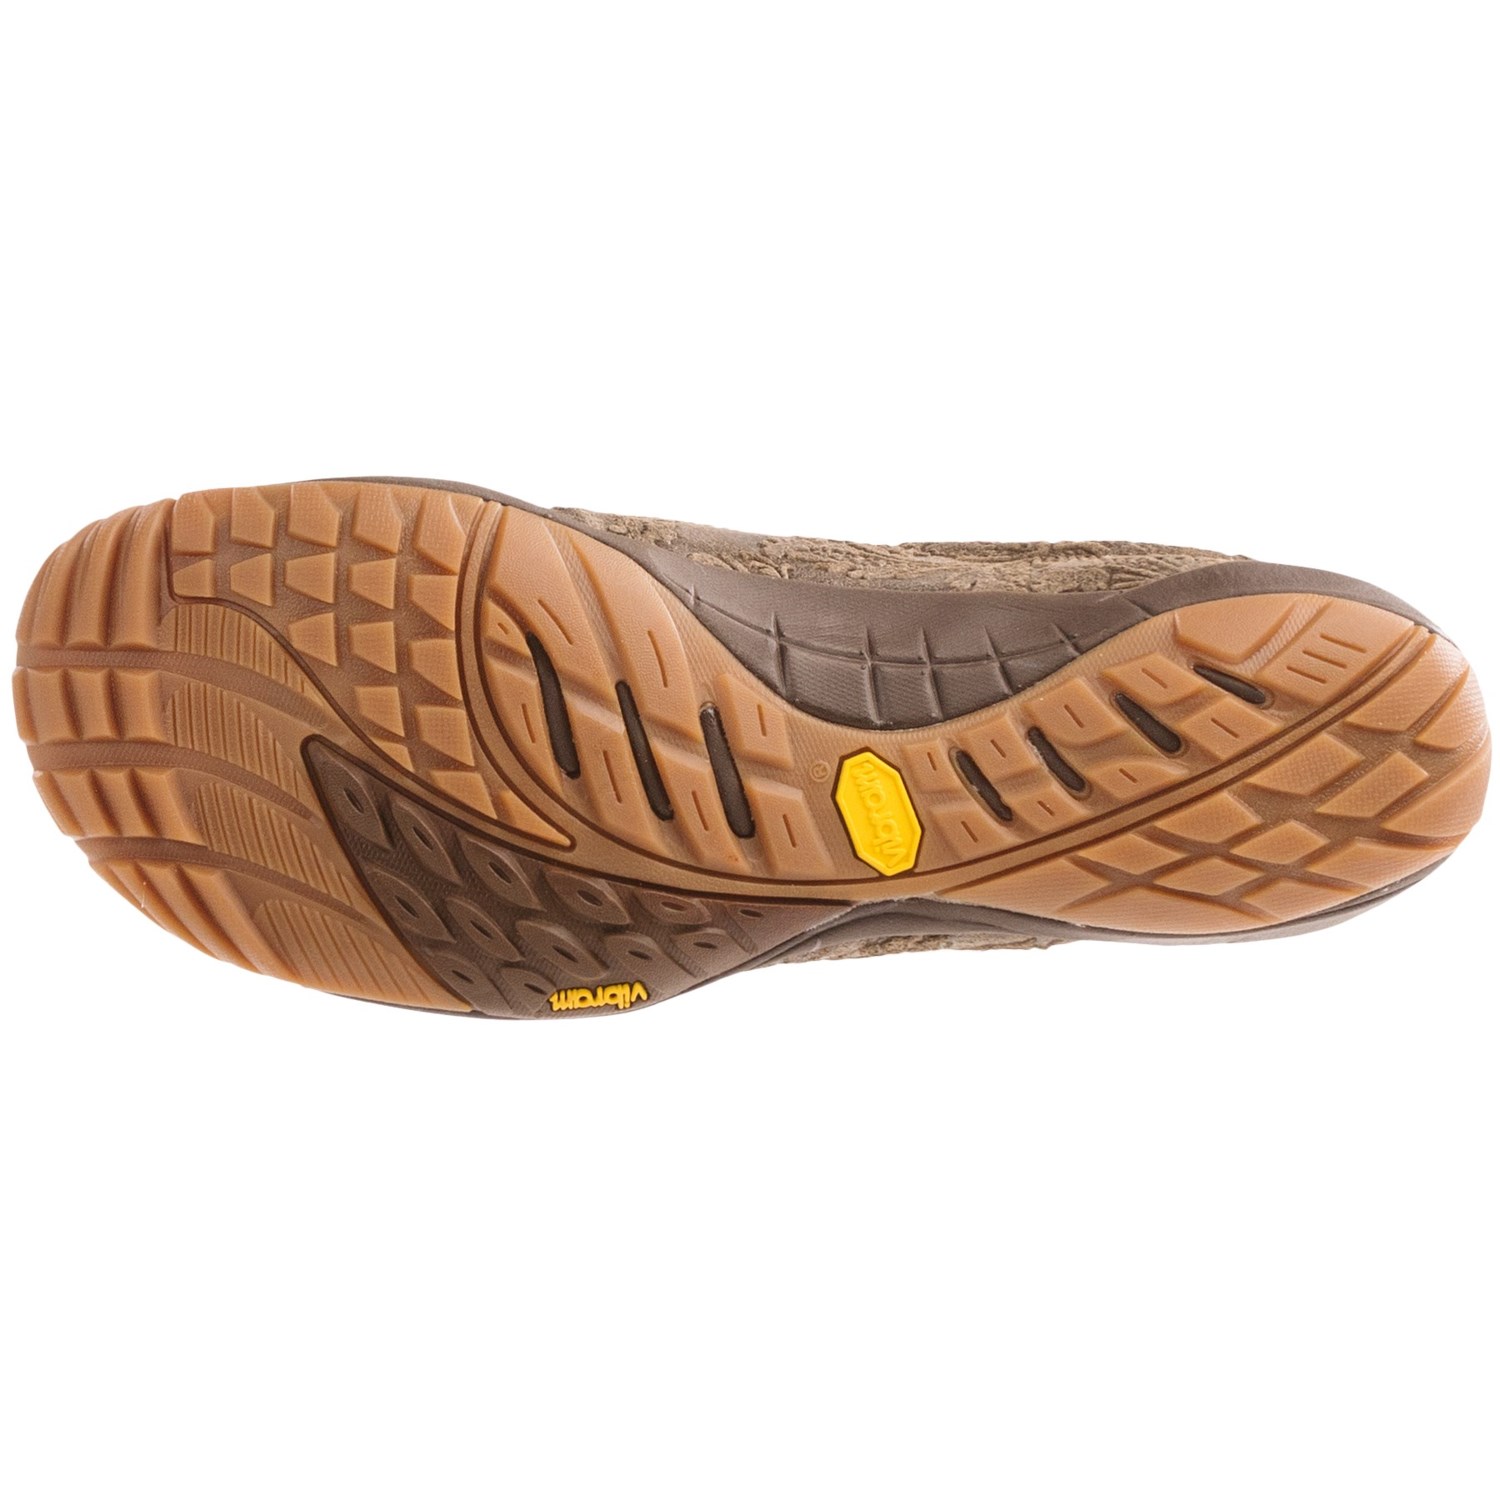 Merrell Barefoot Life Jungle Glove Bloom Shoes (For Women) 8495K - Save 53%